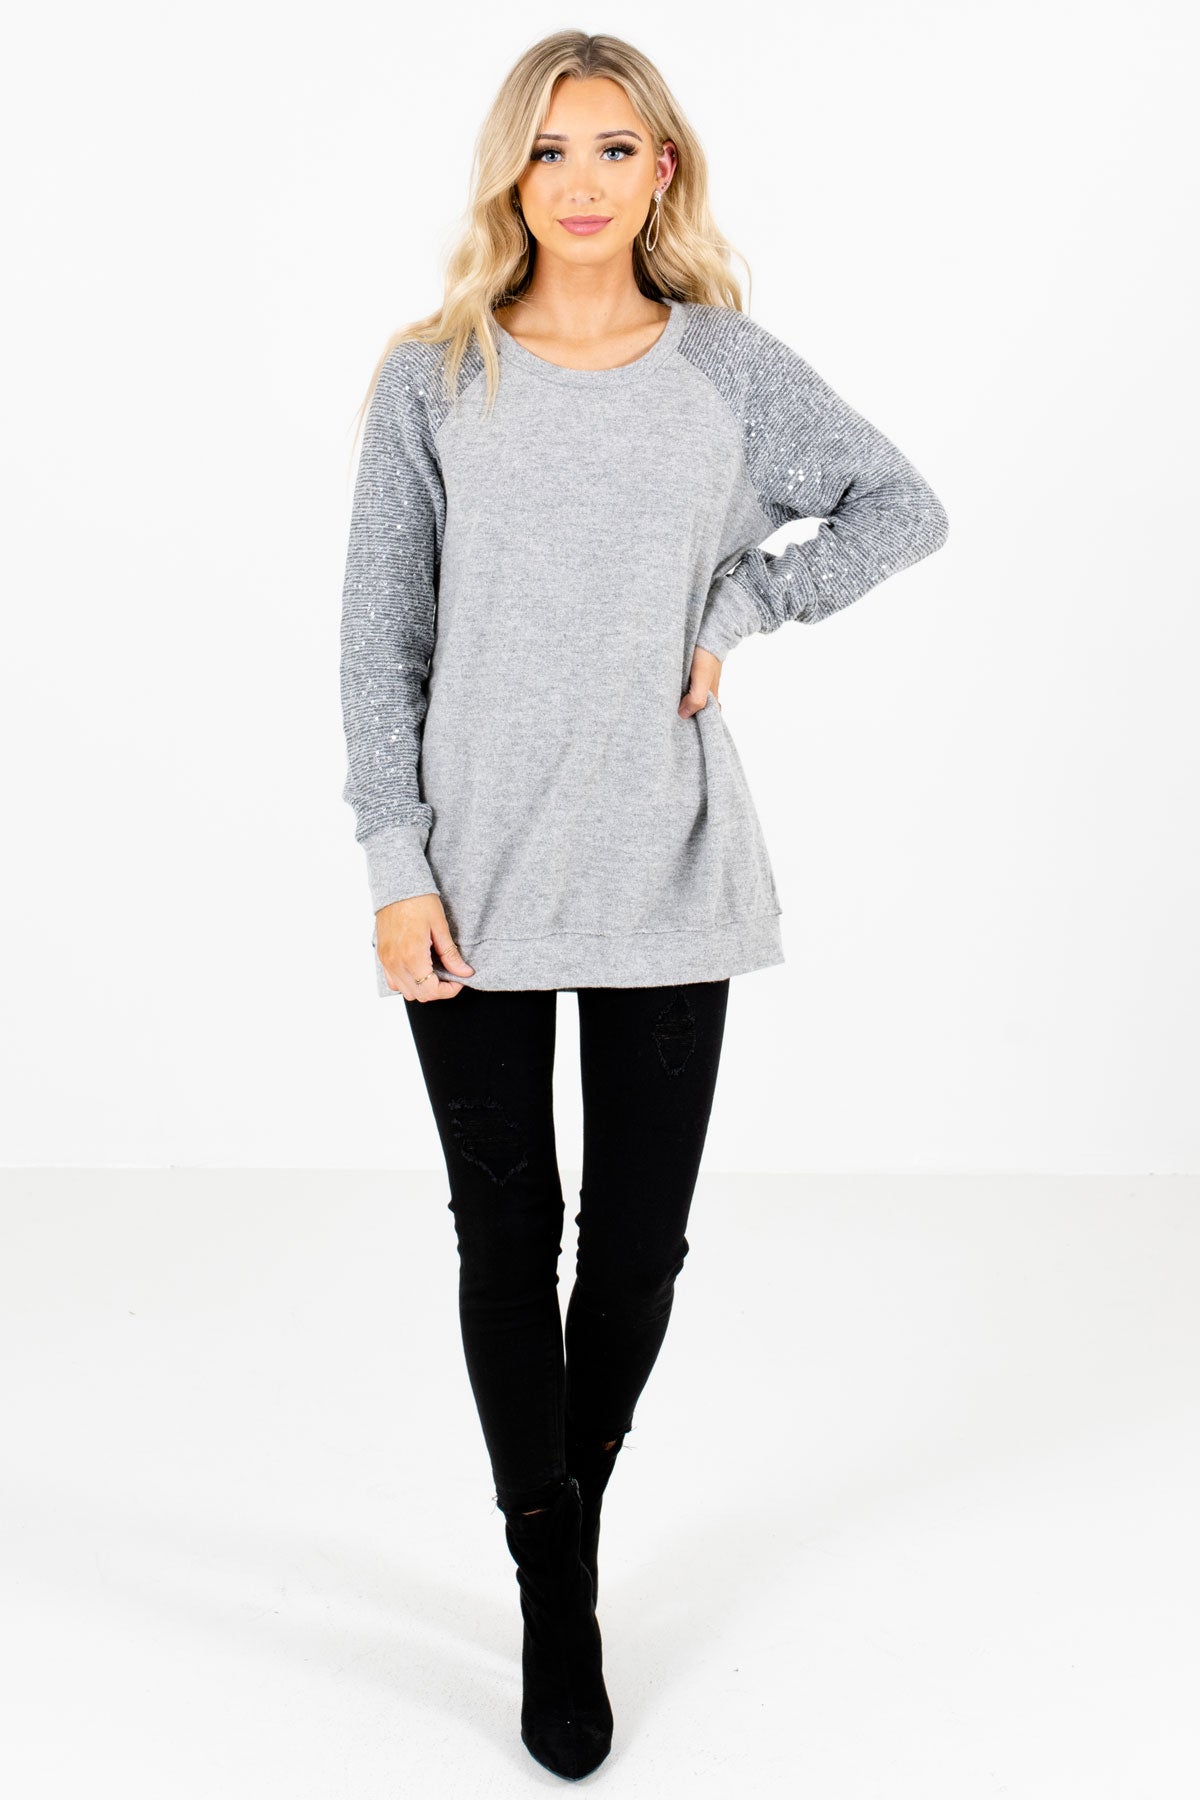 Women's Gray Fall and Winter Boutique Sweaters